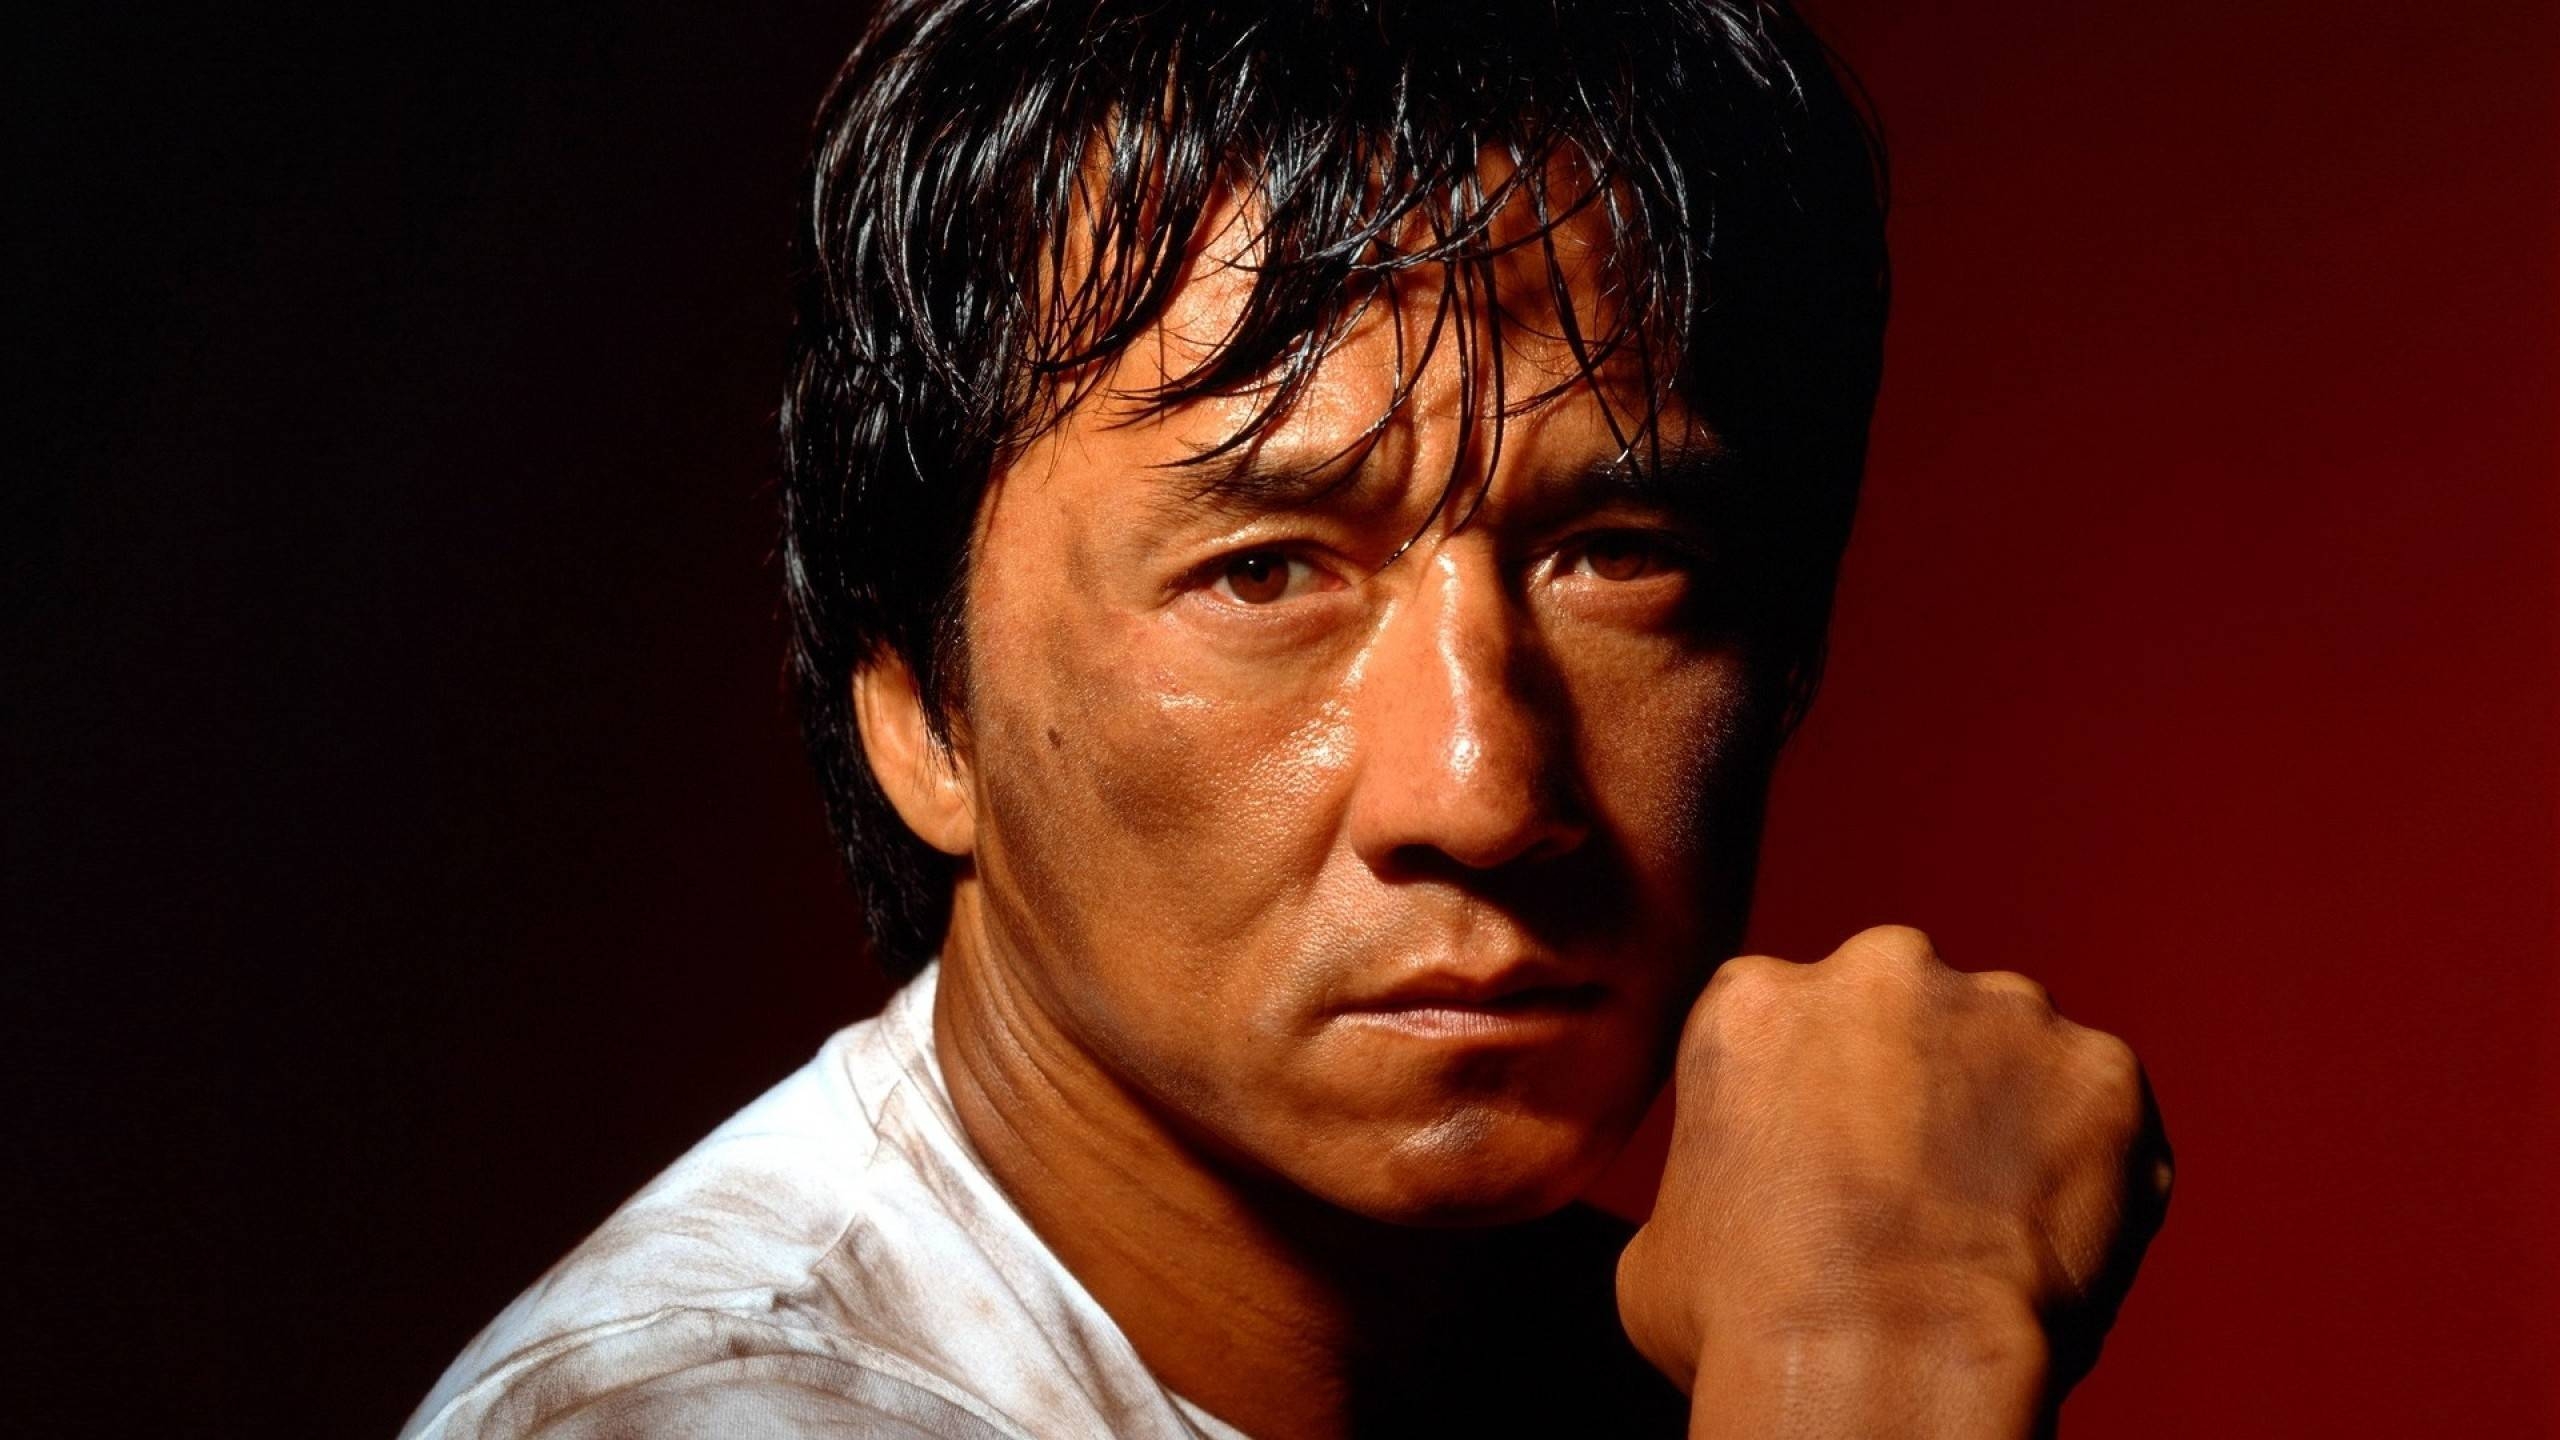 Jackie Chan Pose for 2560x1440 HDTV resolution